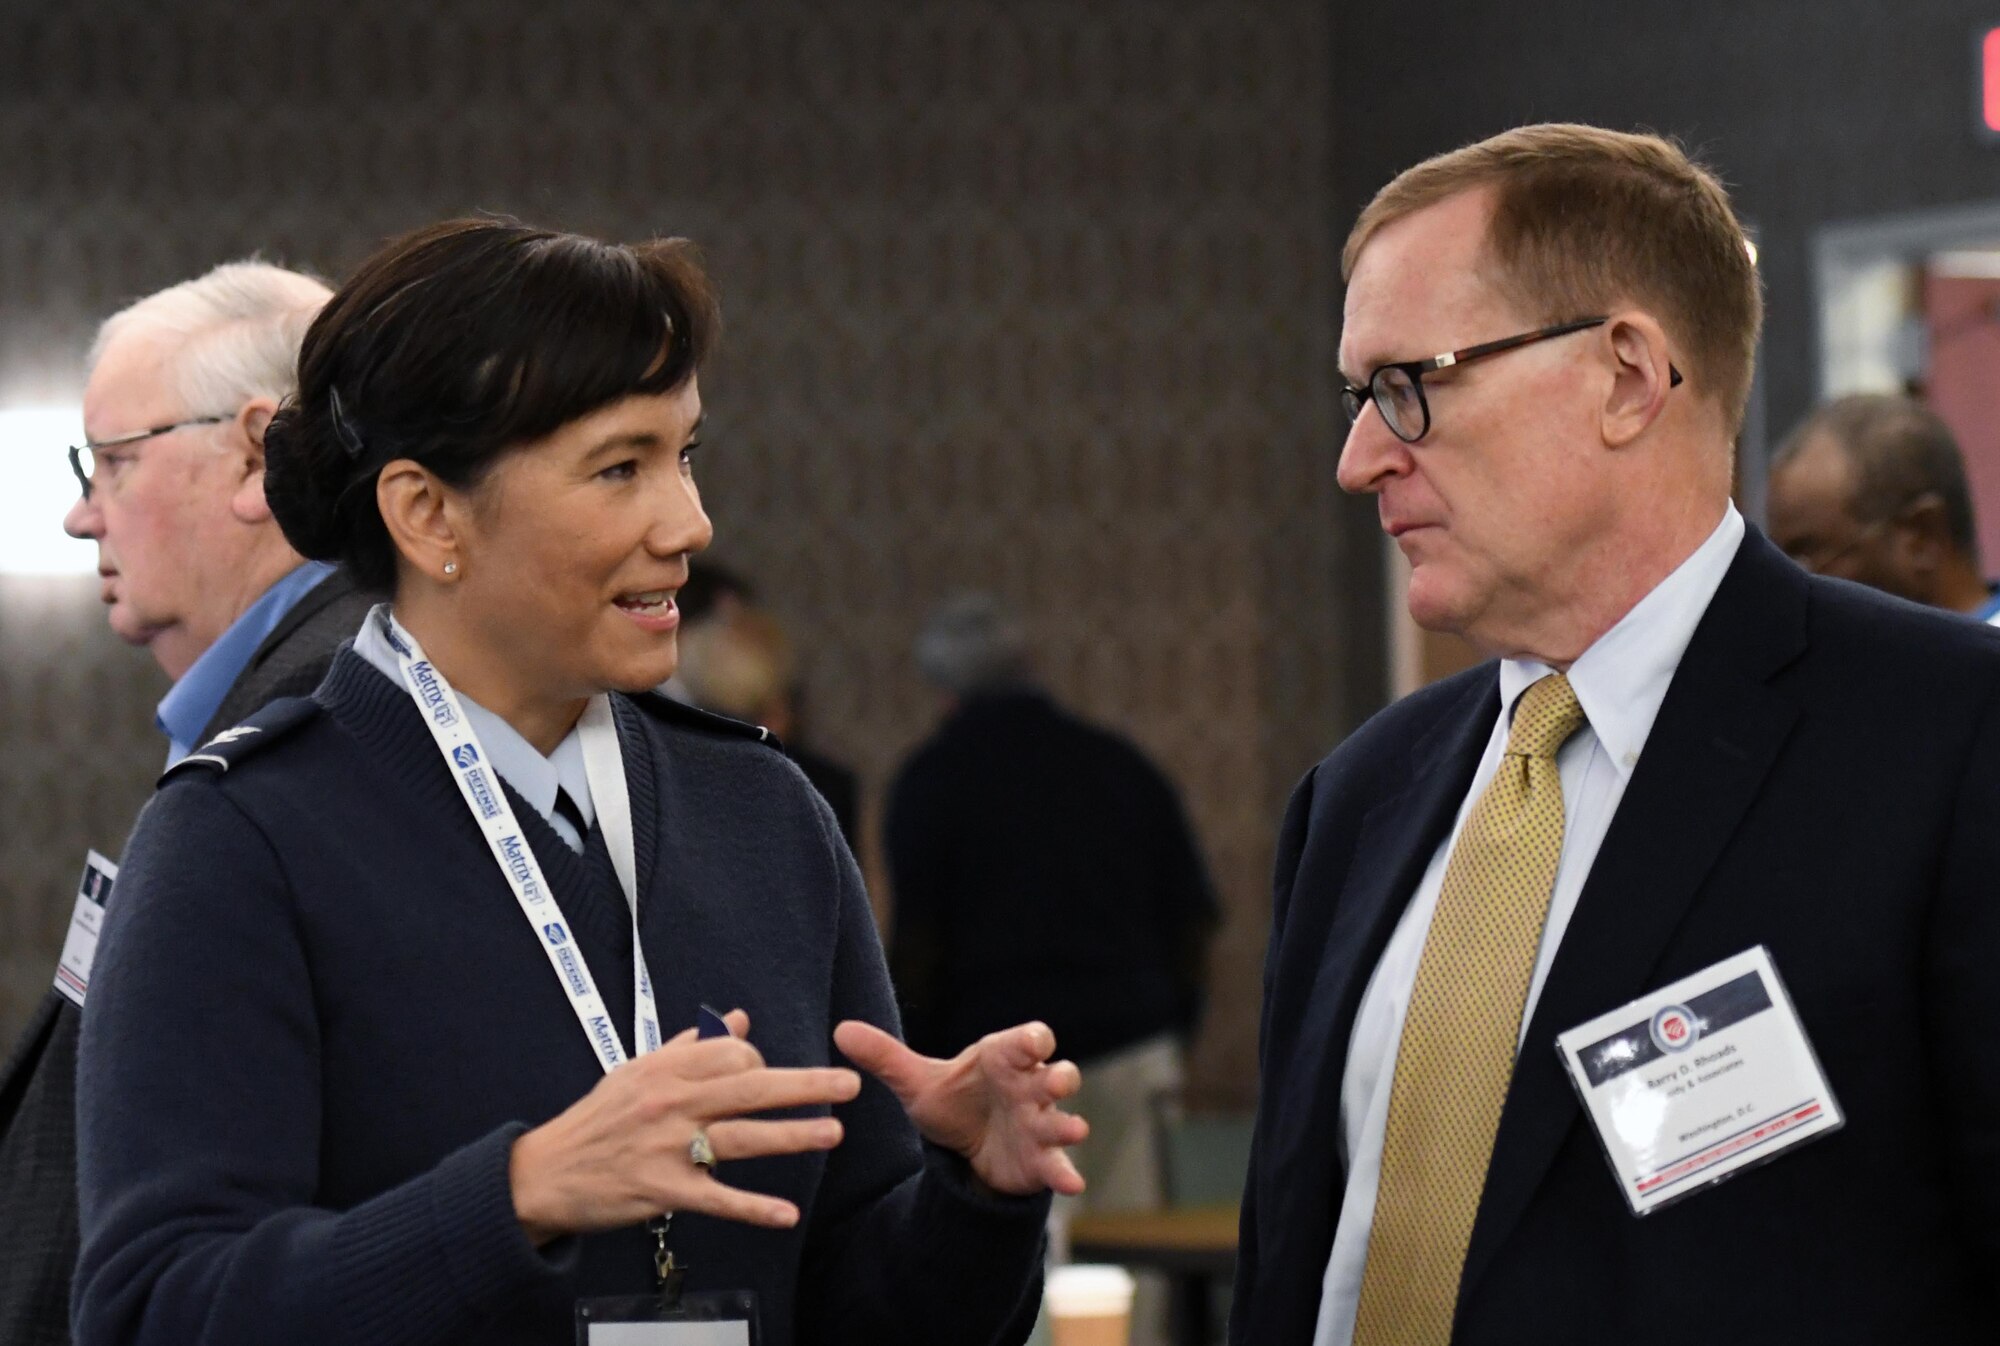 U.S. Air Force Col. Debra Lovette, 81st Training Wing commander, engages in discussion with Barry Rhoads, Cassidy and Associates chairman, during the Mississippi Gulf Coast Defense Forum inside the Courtyard by Marriott Gulfport Beachfront in Gulfport, Mississippi, Dec. 3, 2018. The two-day forum is a product of the Association of Defense Communities, an organization focused on advancing community-military partnerships that promote the value of military installations, strengthen communities and states through collaborative relationships and sustainable regional planning. (U.S. Air Force photo by Kemberly Groue)